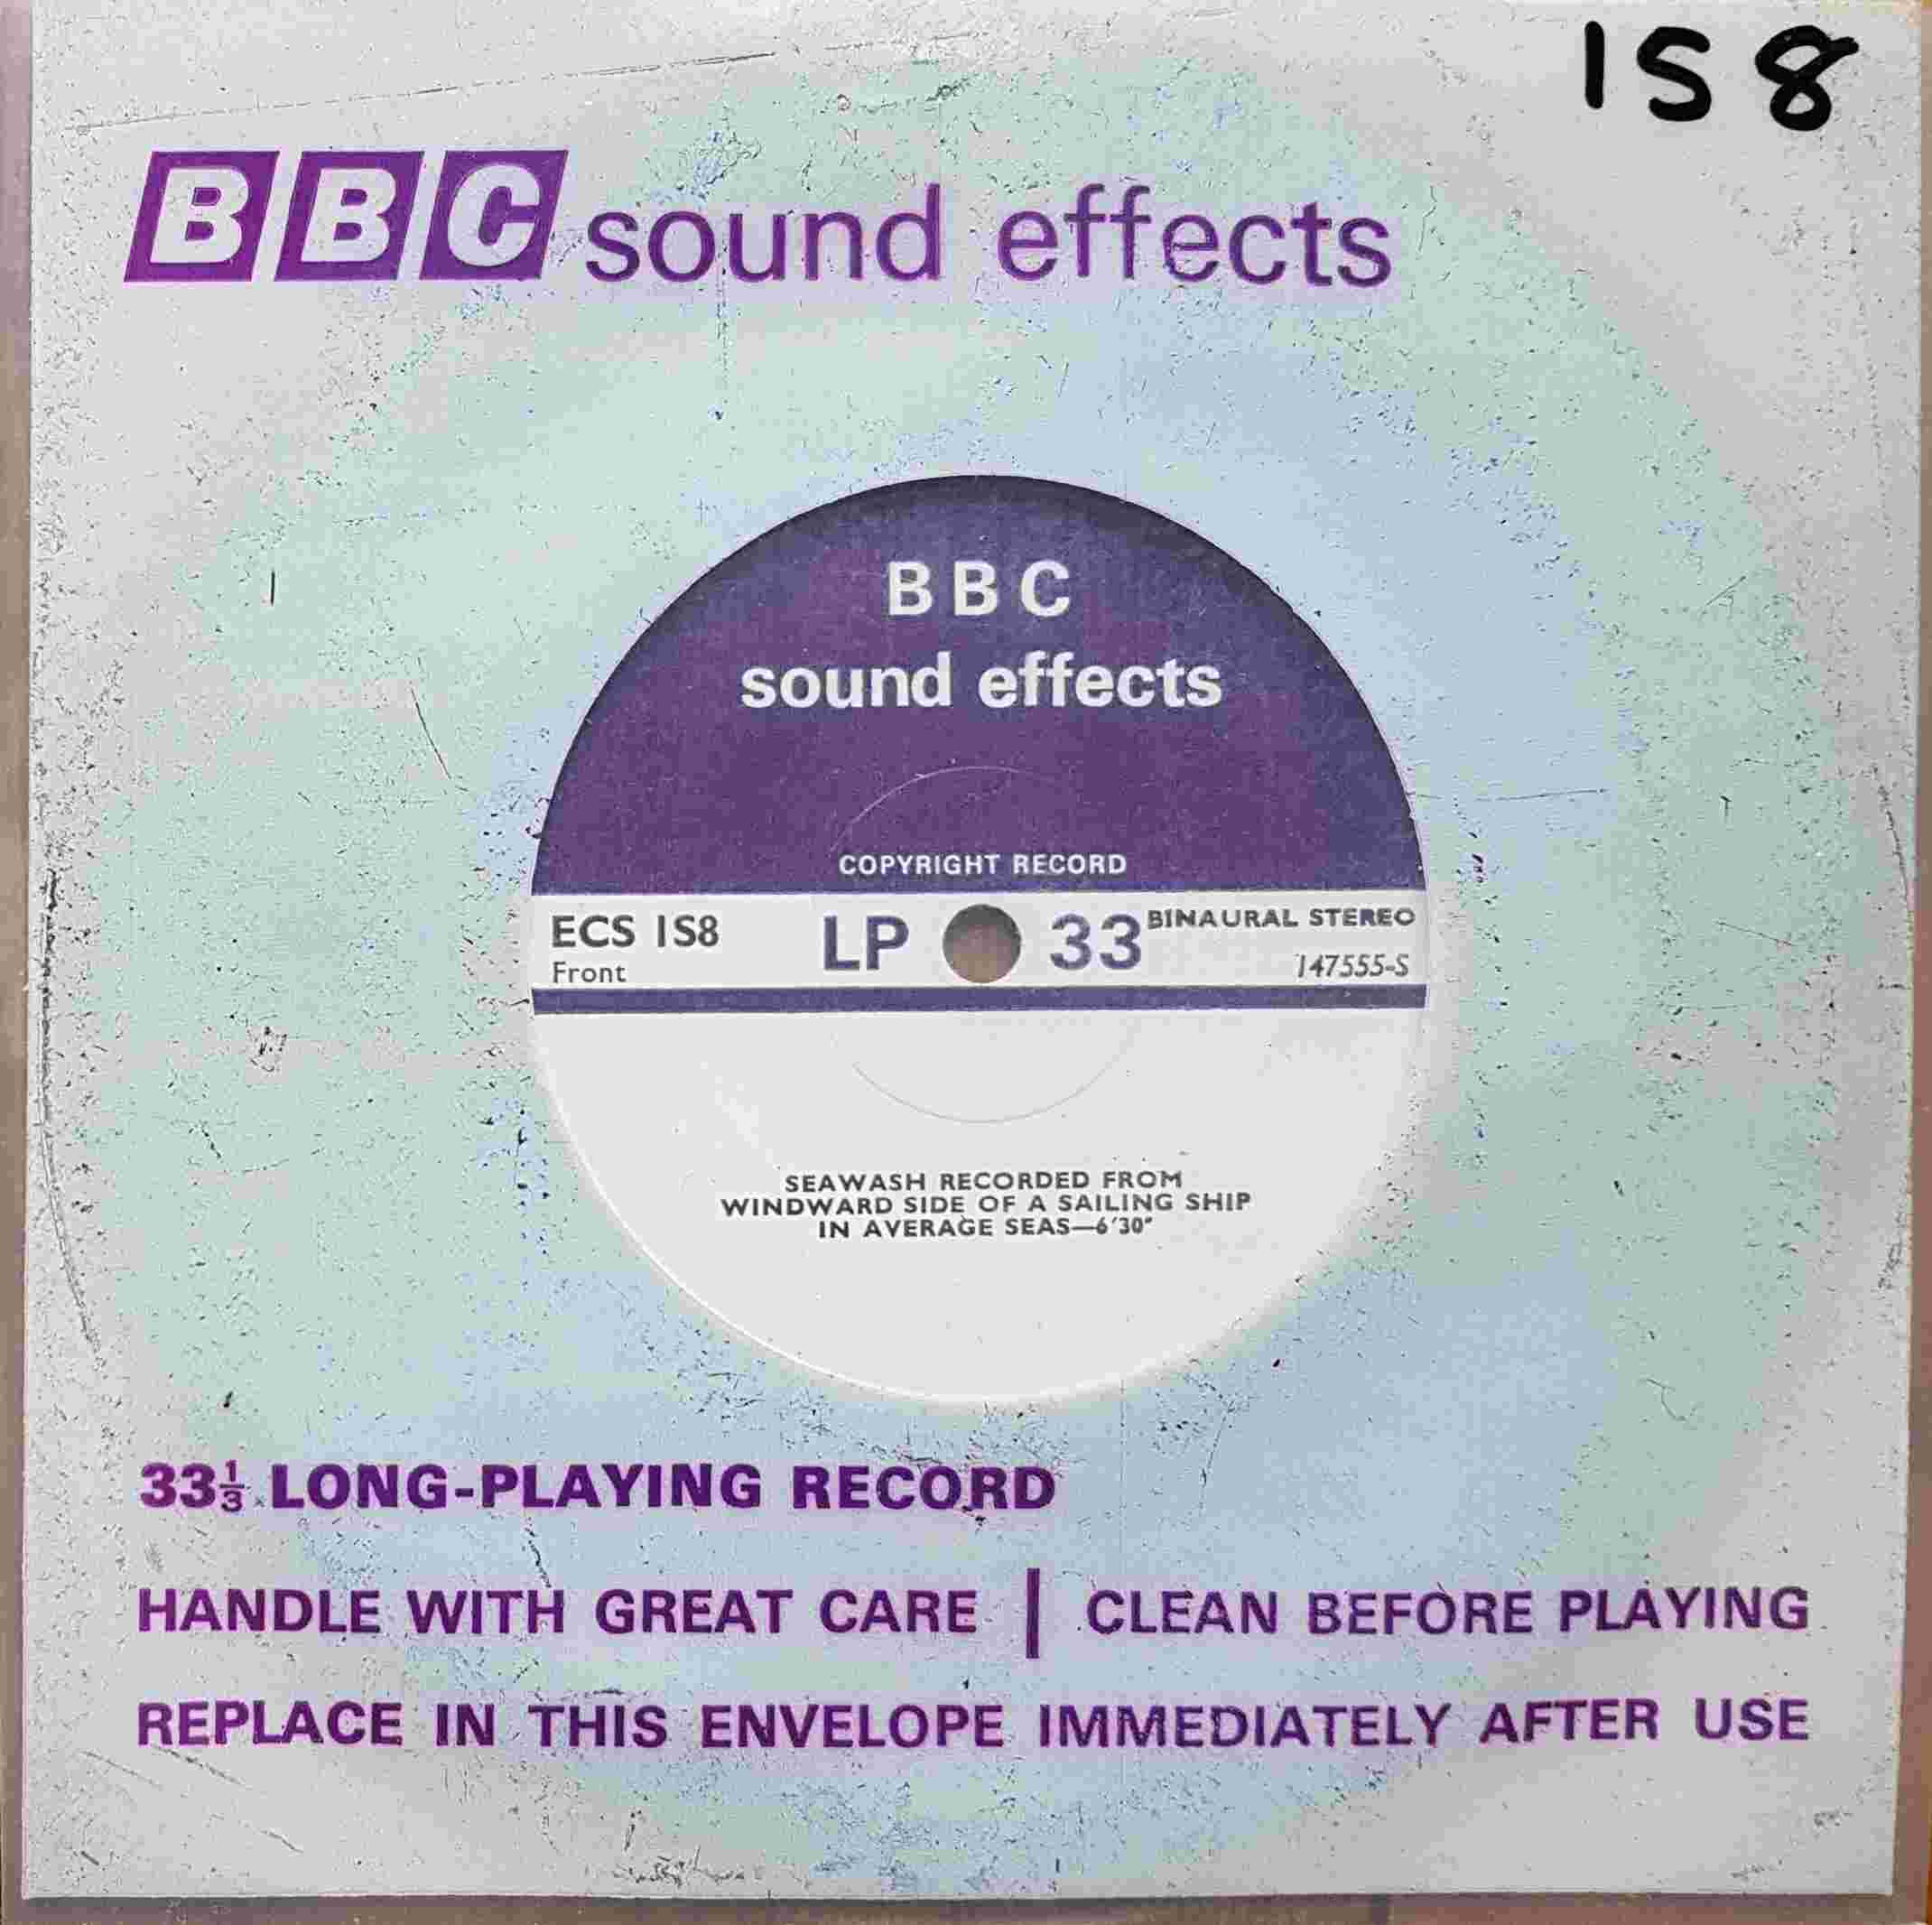 Picture of ECS 1S8 Seawash / Heavy surf and waves by artist Not registered from the BBC records and Tapes library